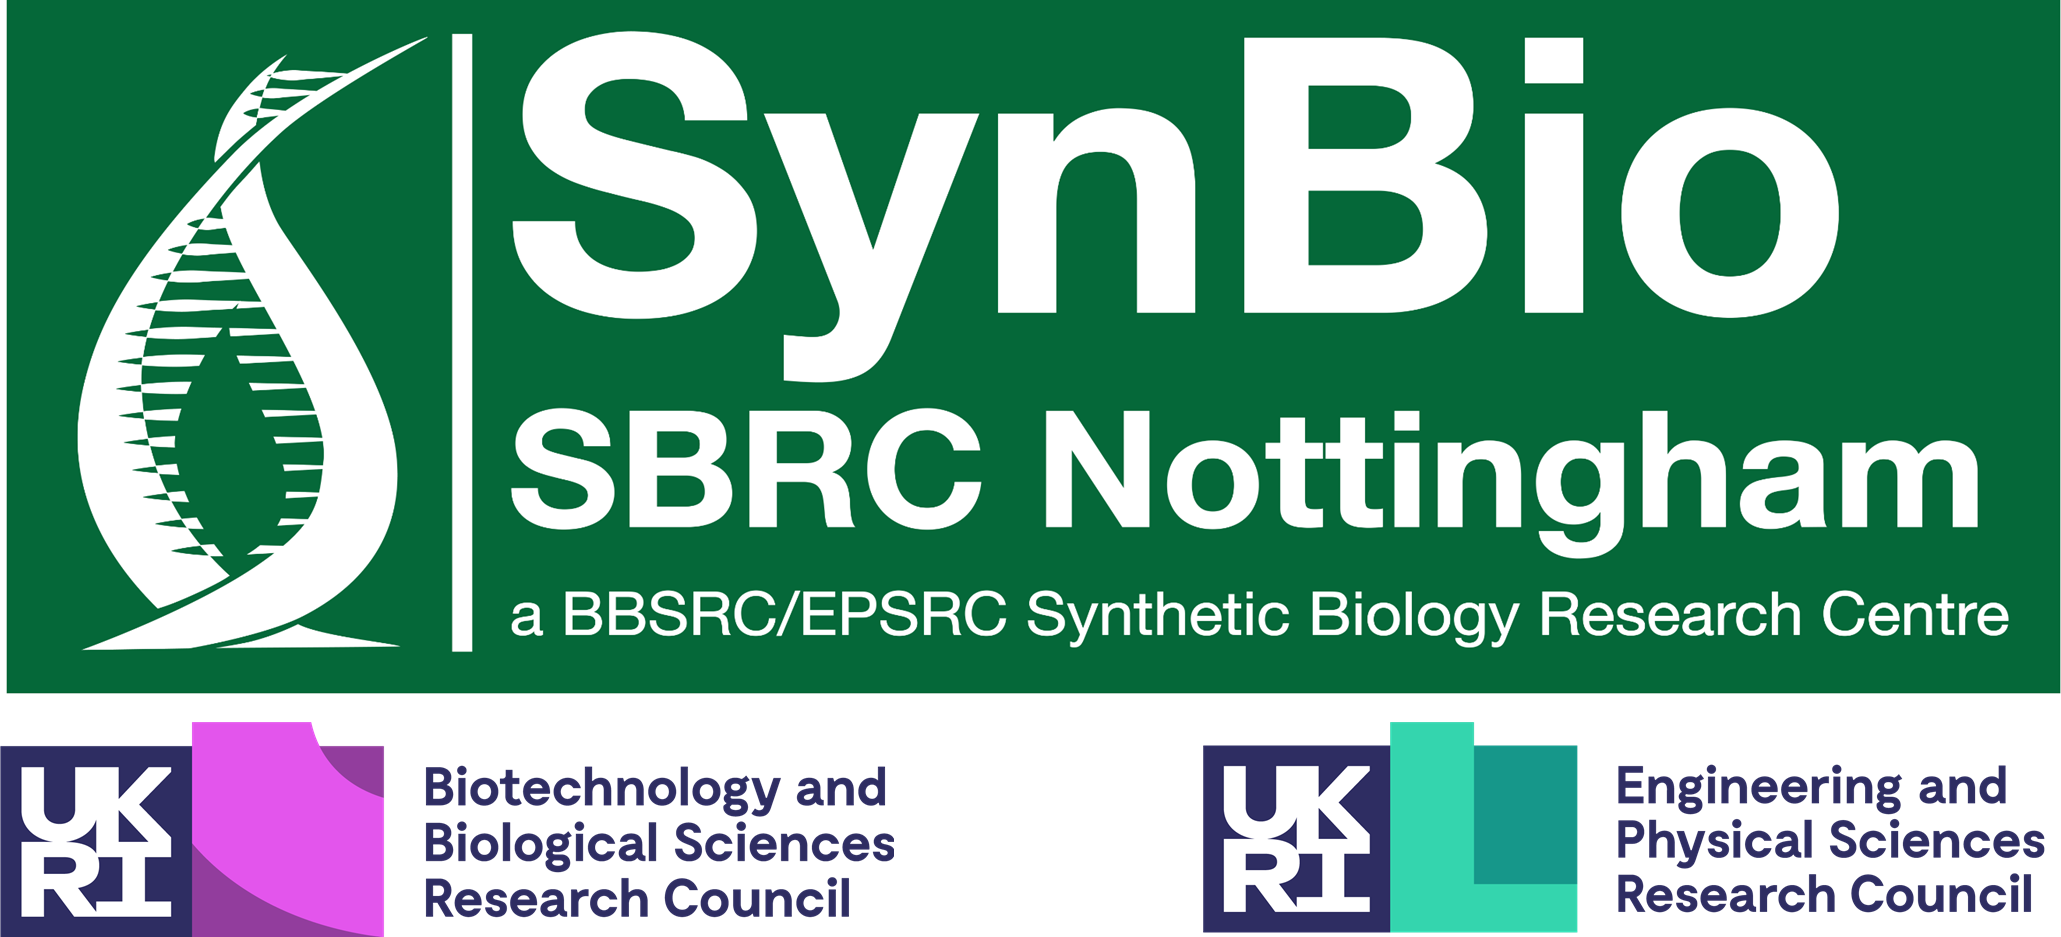 The Synthetic Biology Research Centre – Nottingham